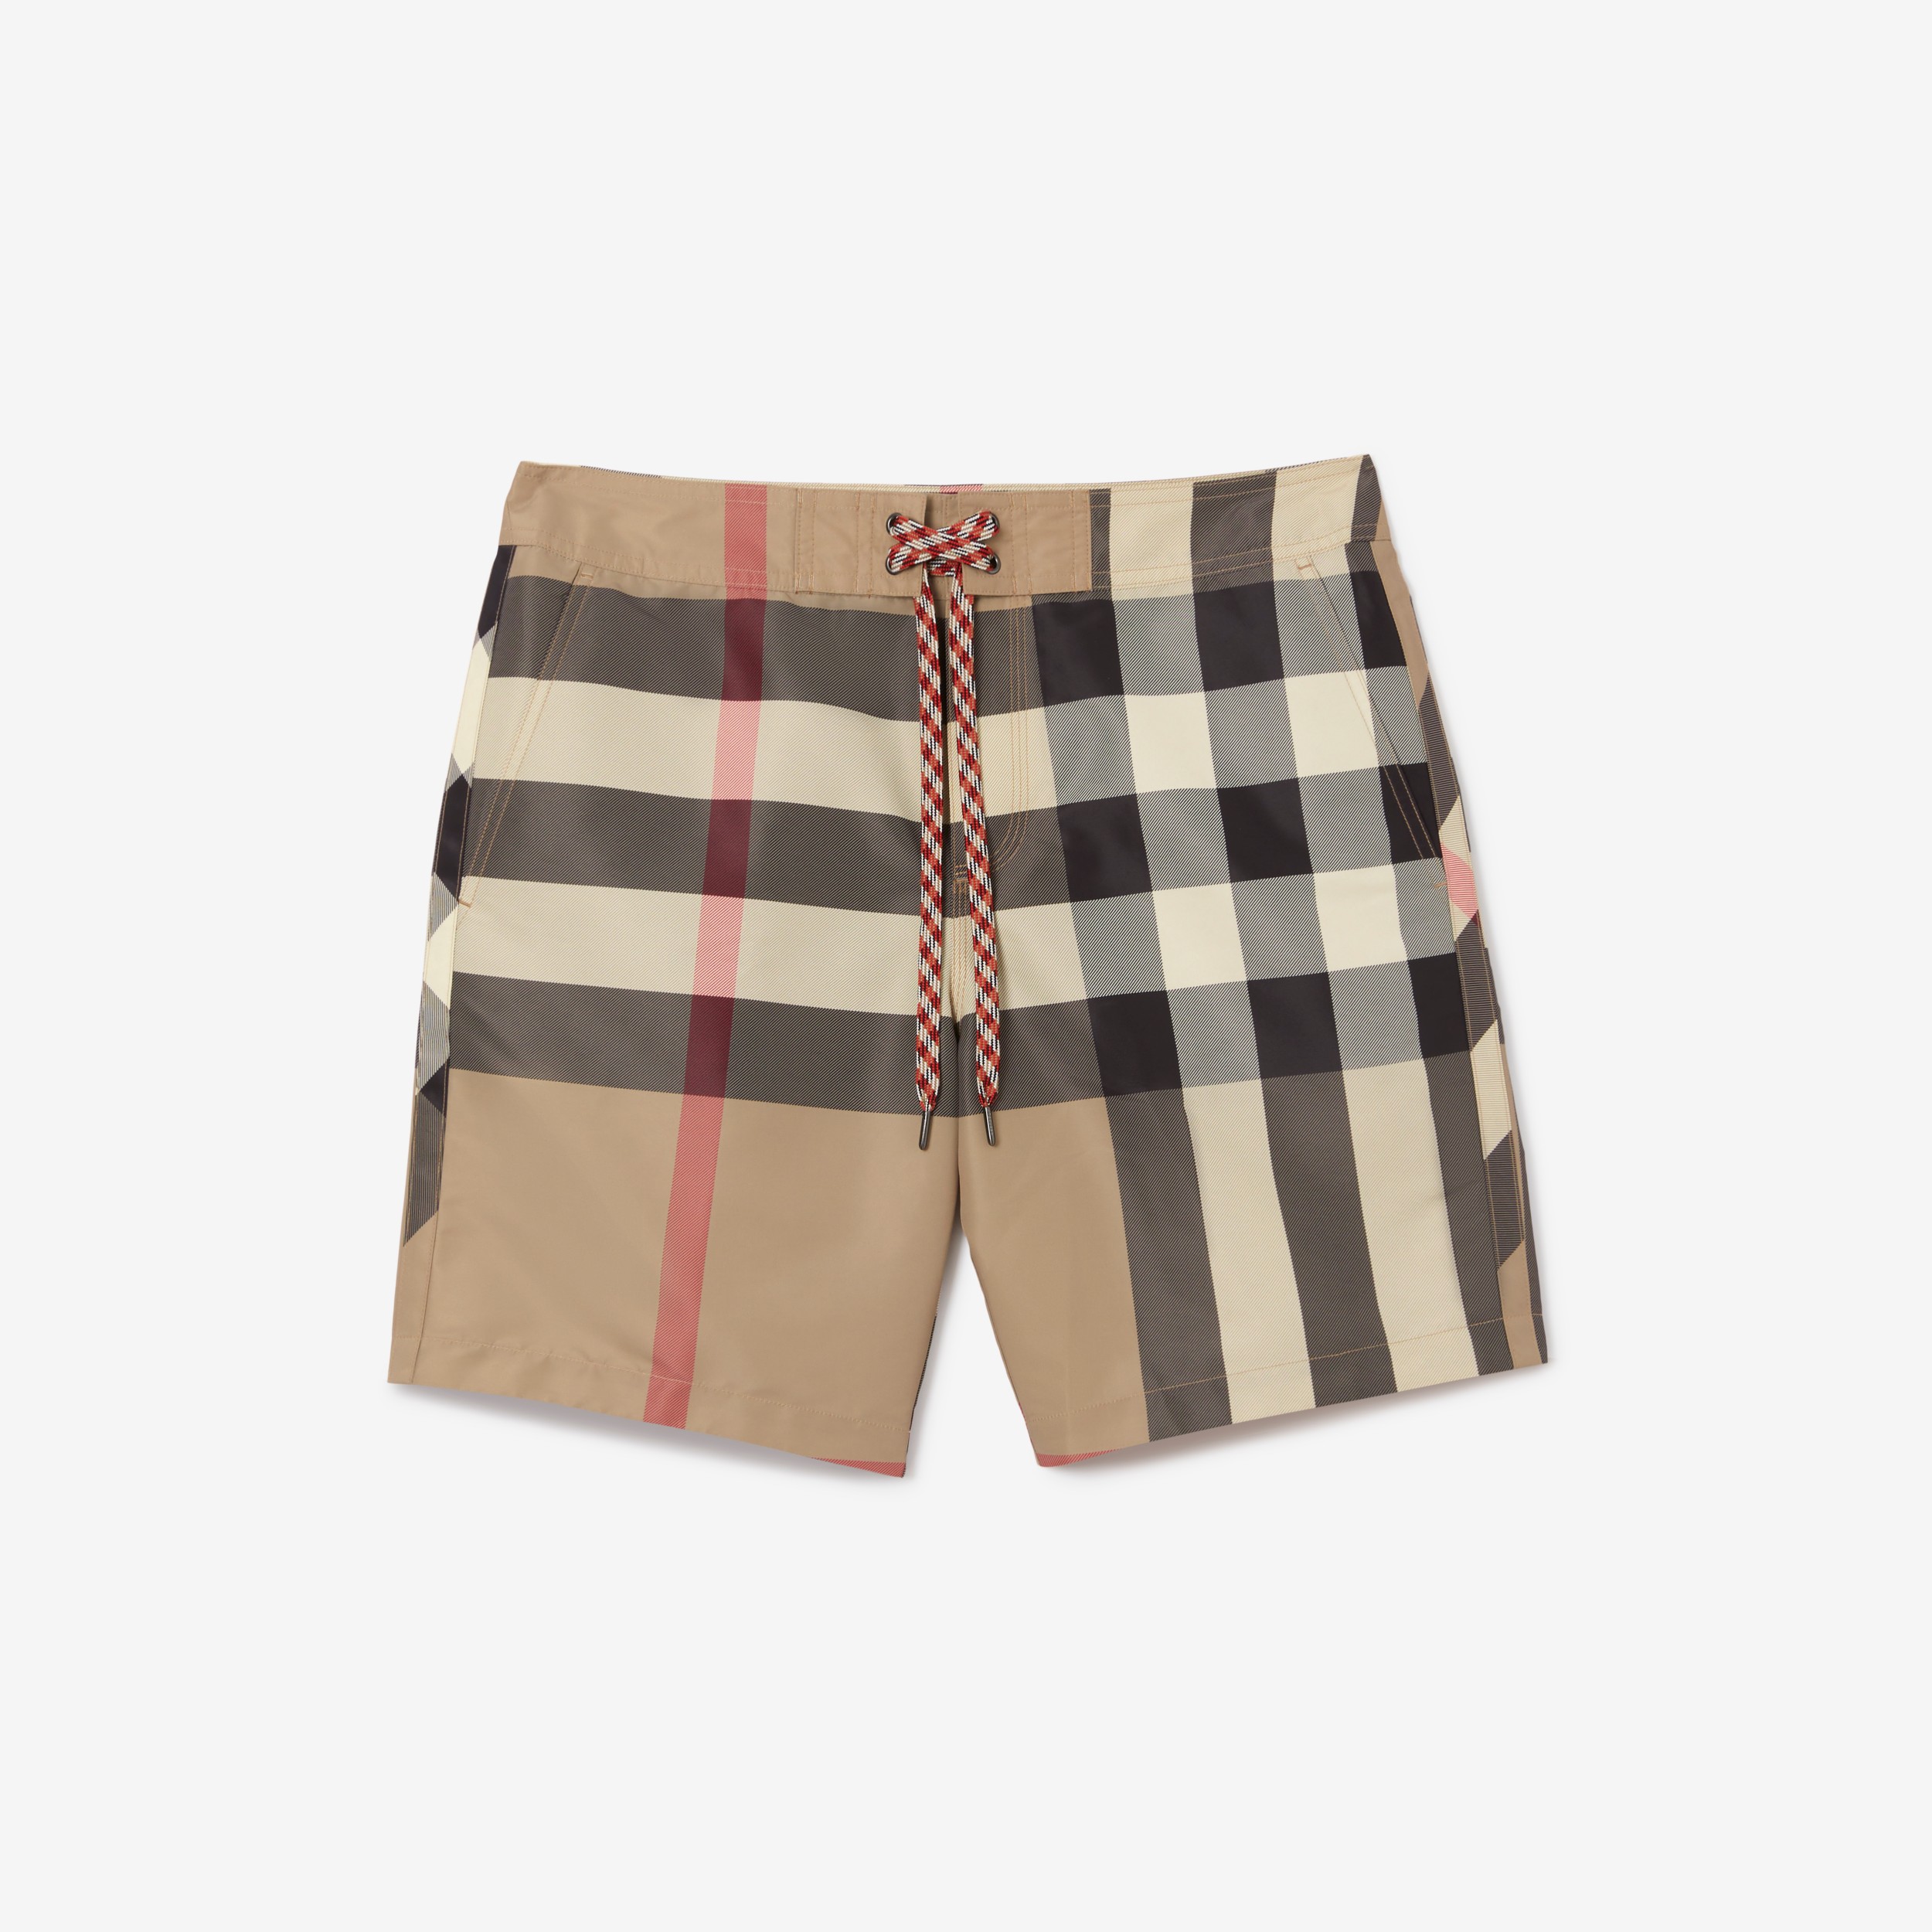 Total 81+ imagen burberry shorts price